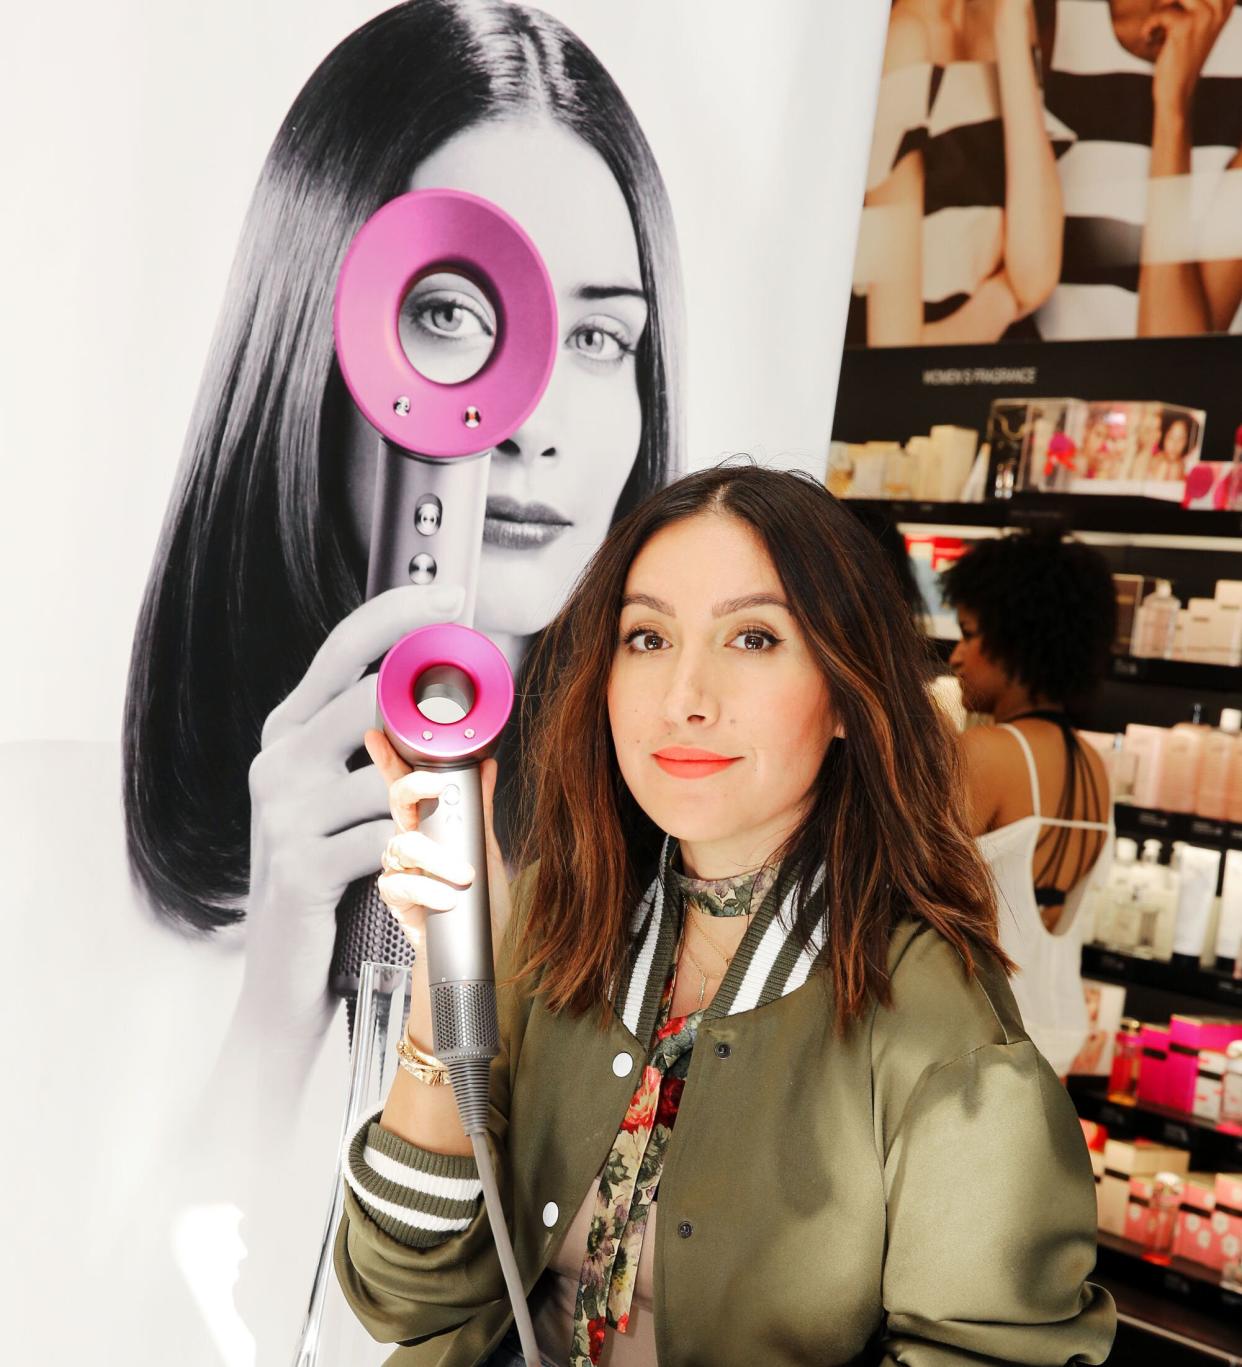 Celebrity hair stylist Jen Atkin endorsed the Dyson Supersonic hair dryer at a Los Angeles event in 2016. (Photo: Rachel Murray via Getty Images)